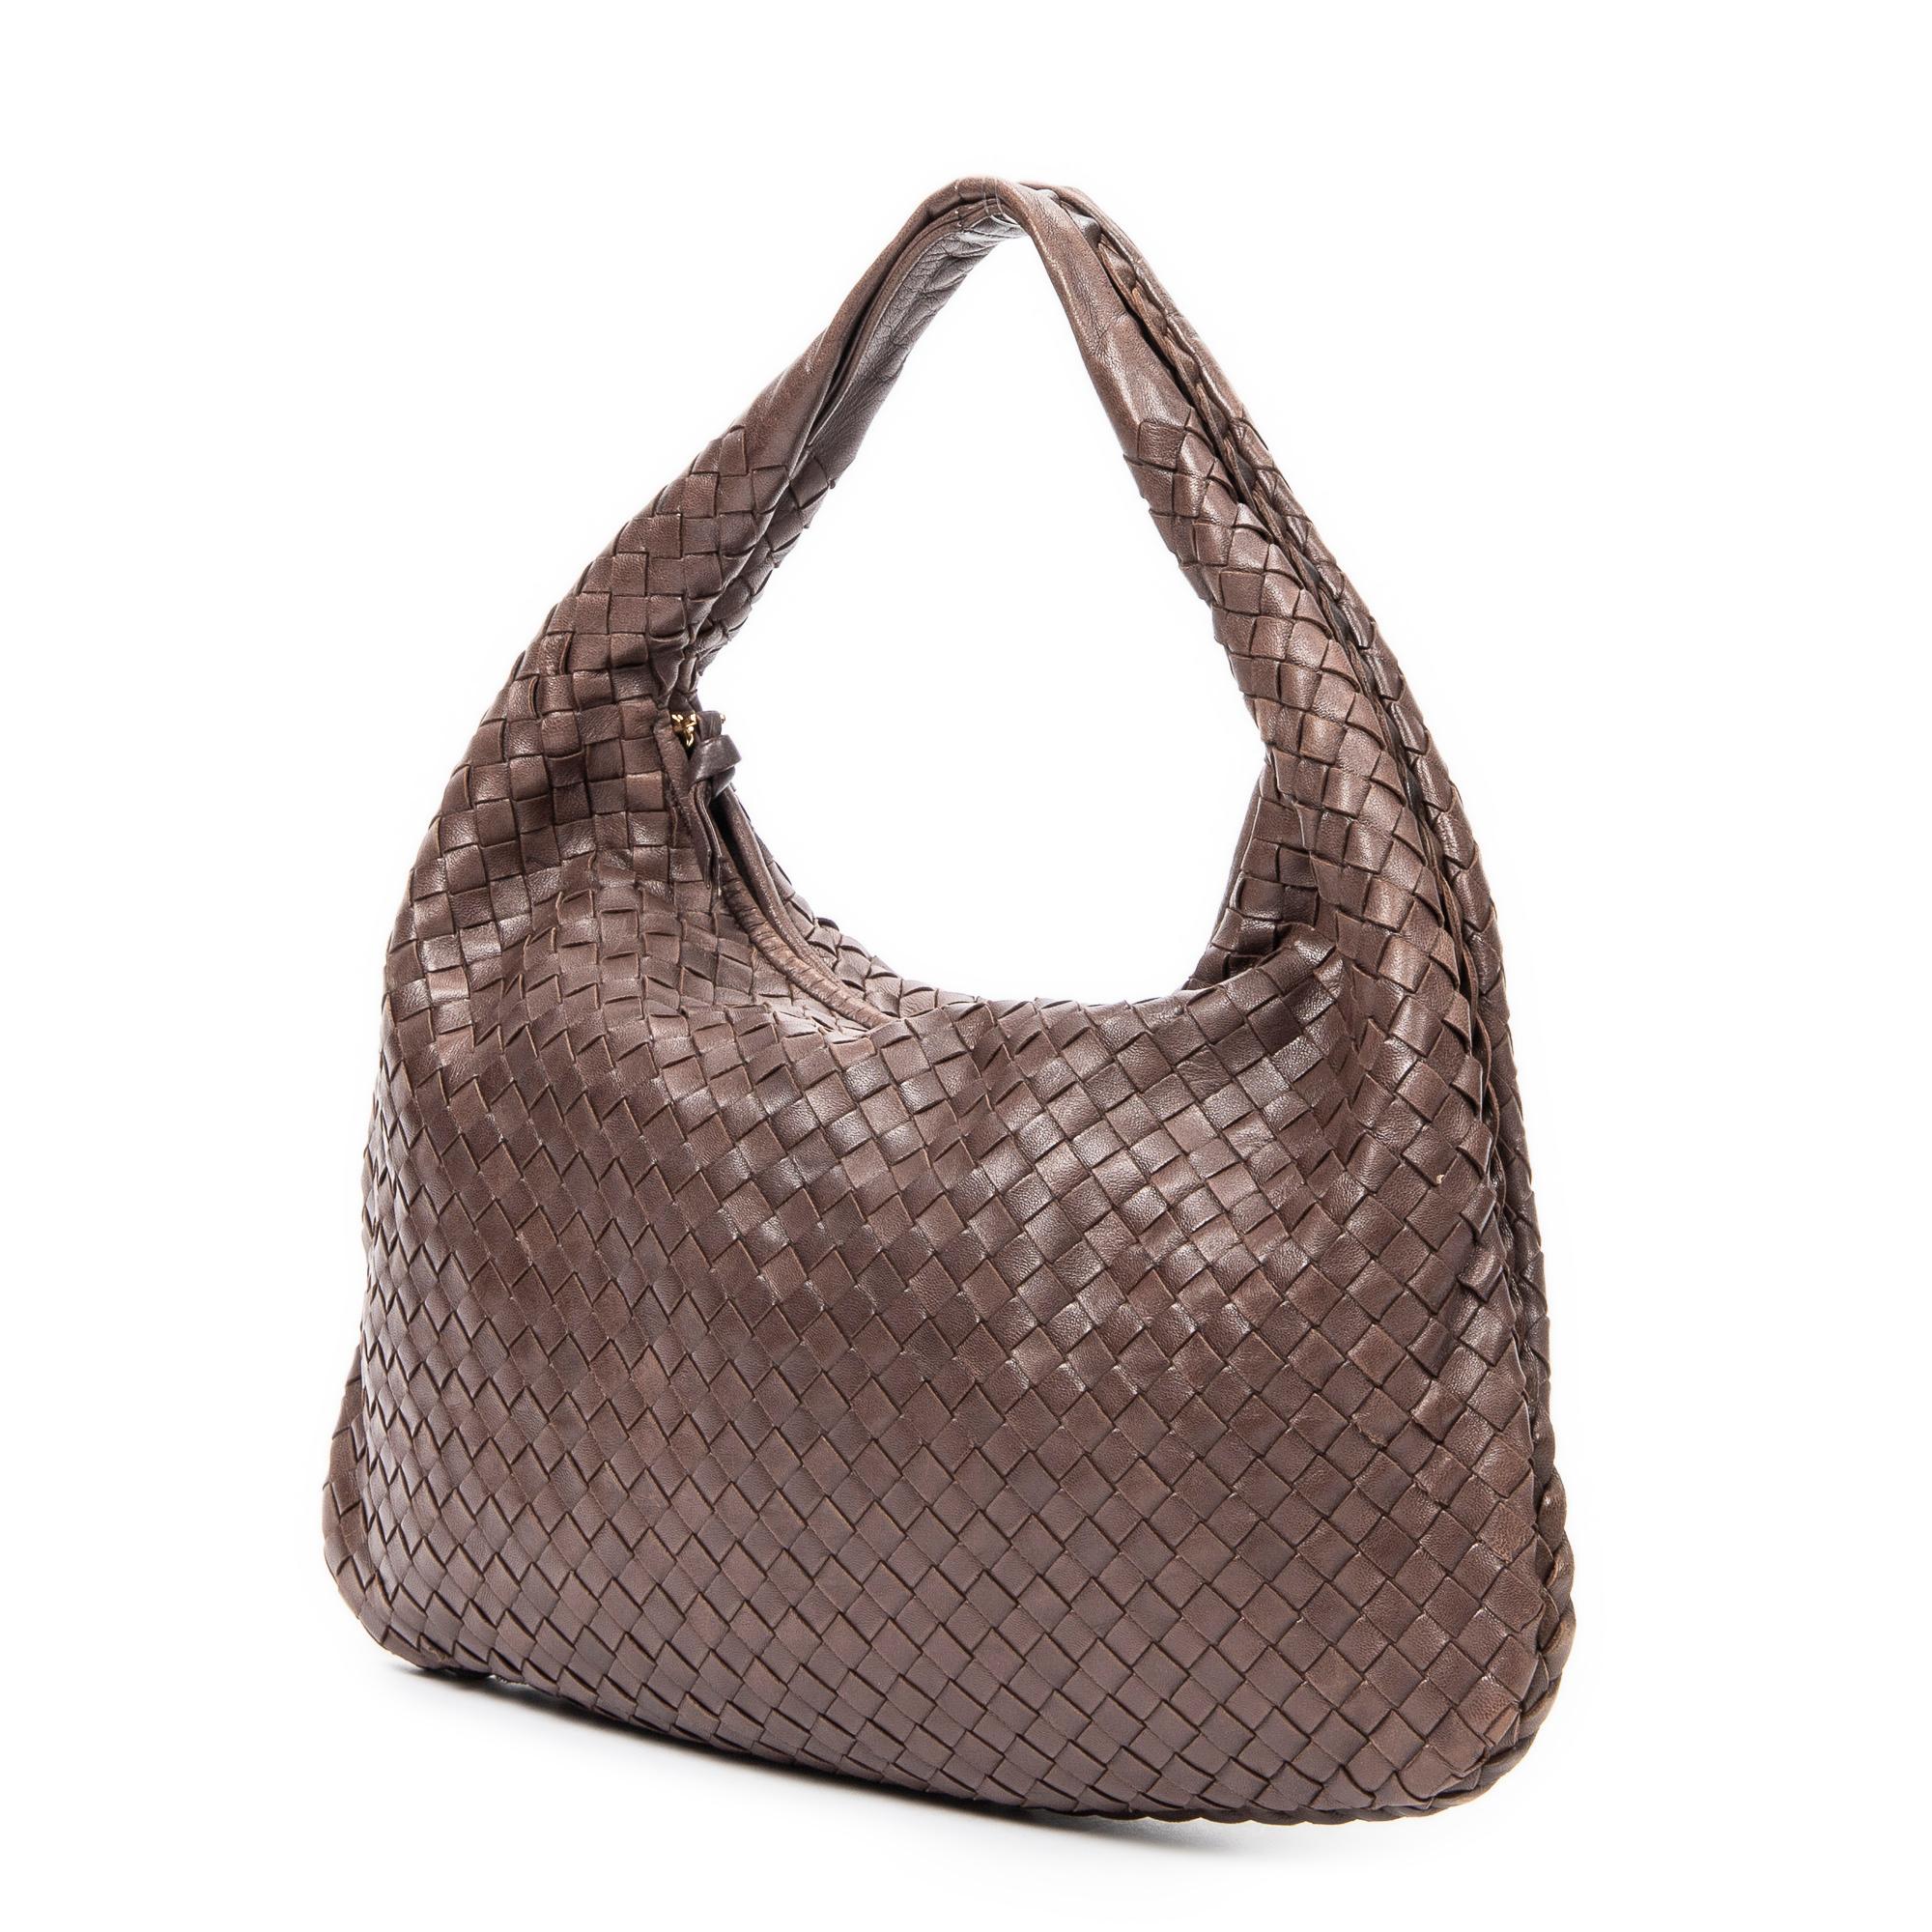 Elevate your sophistication with the Brown Classic Hobo, crafted in luxurious brown intrecciato leather. Gold hardware complements the suede interior that unveils a zippered pocket. This creation showcases Bottega Veneta's mastery in combining